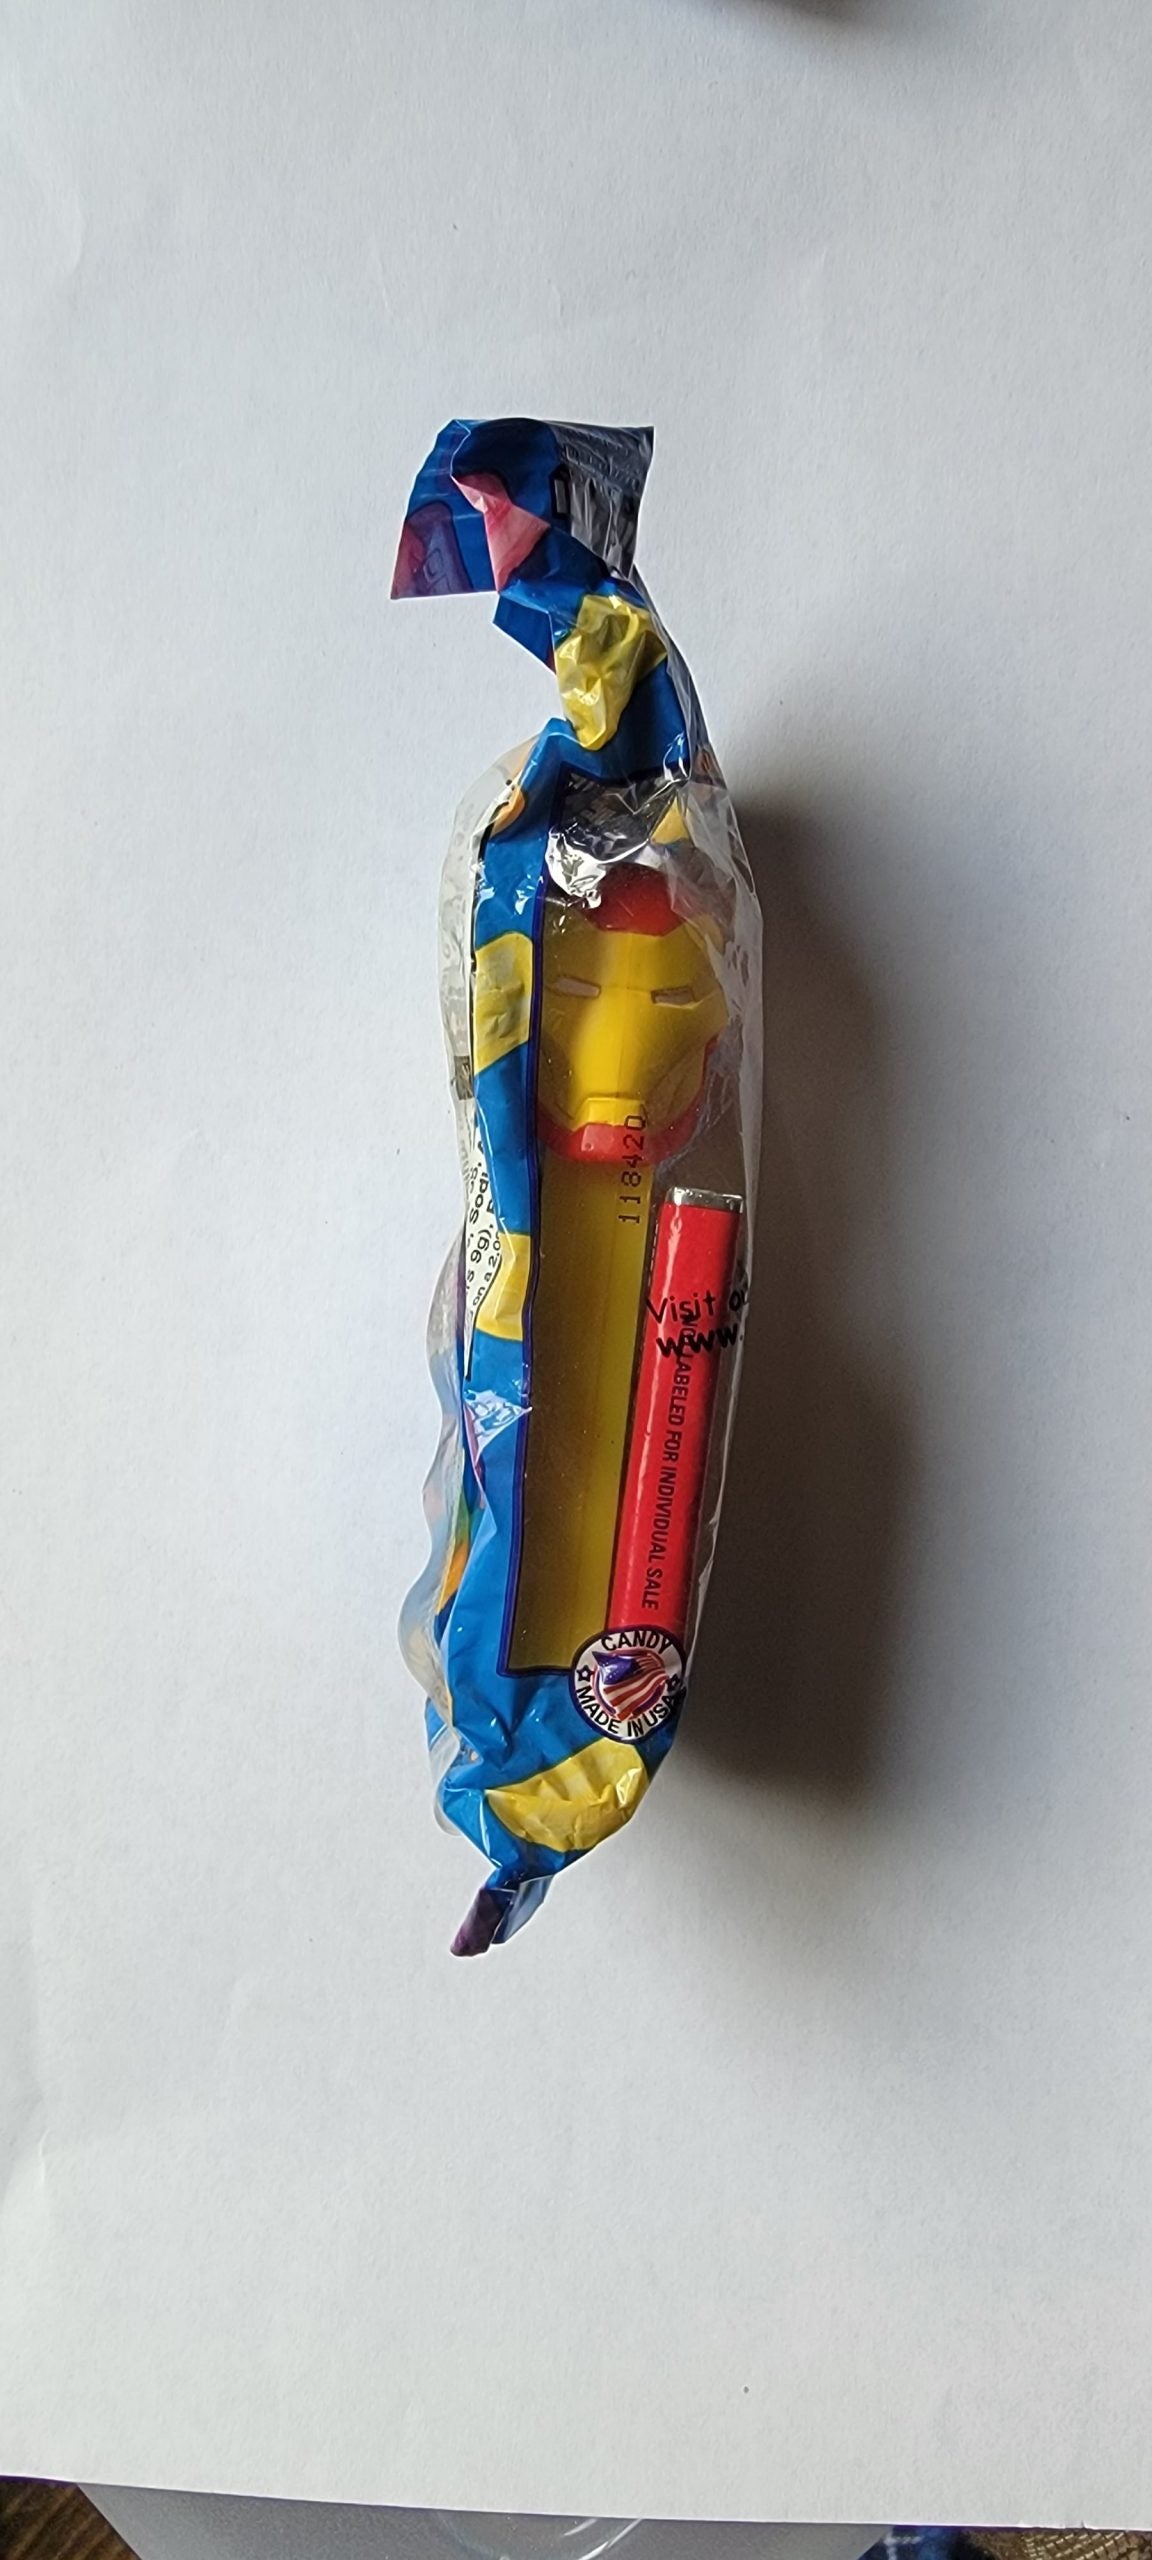 Iron Man Marvel Pez Dispenser New in Original Packaging simple Xclusive Collectibles   